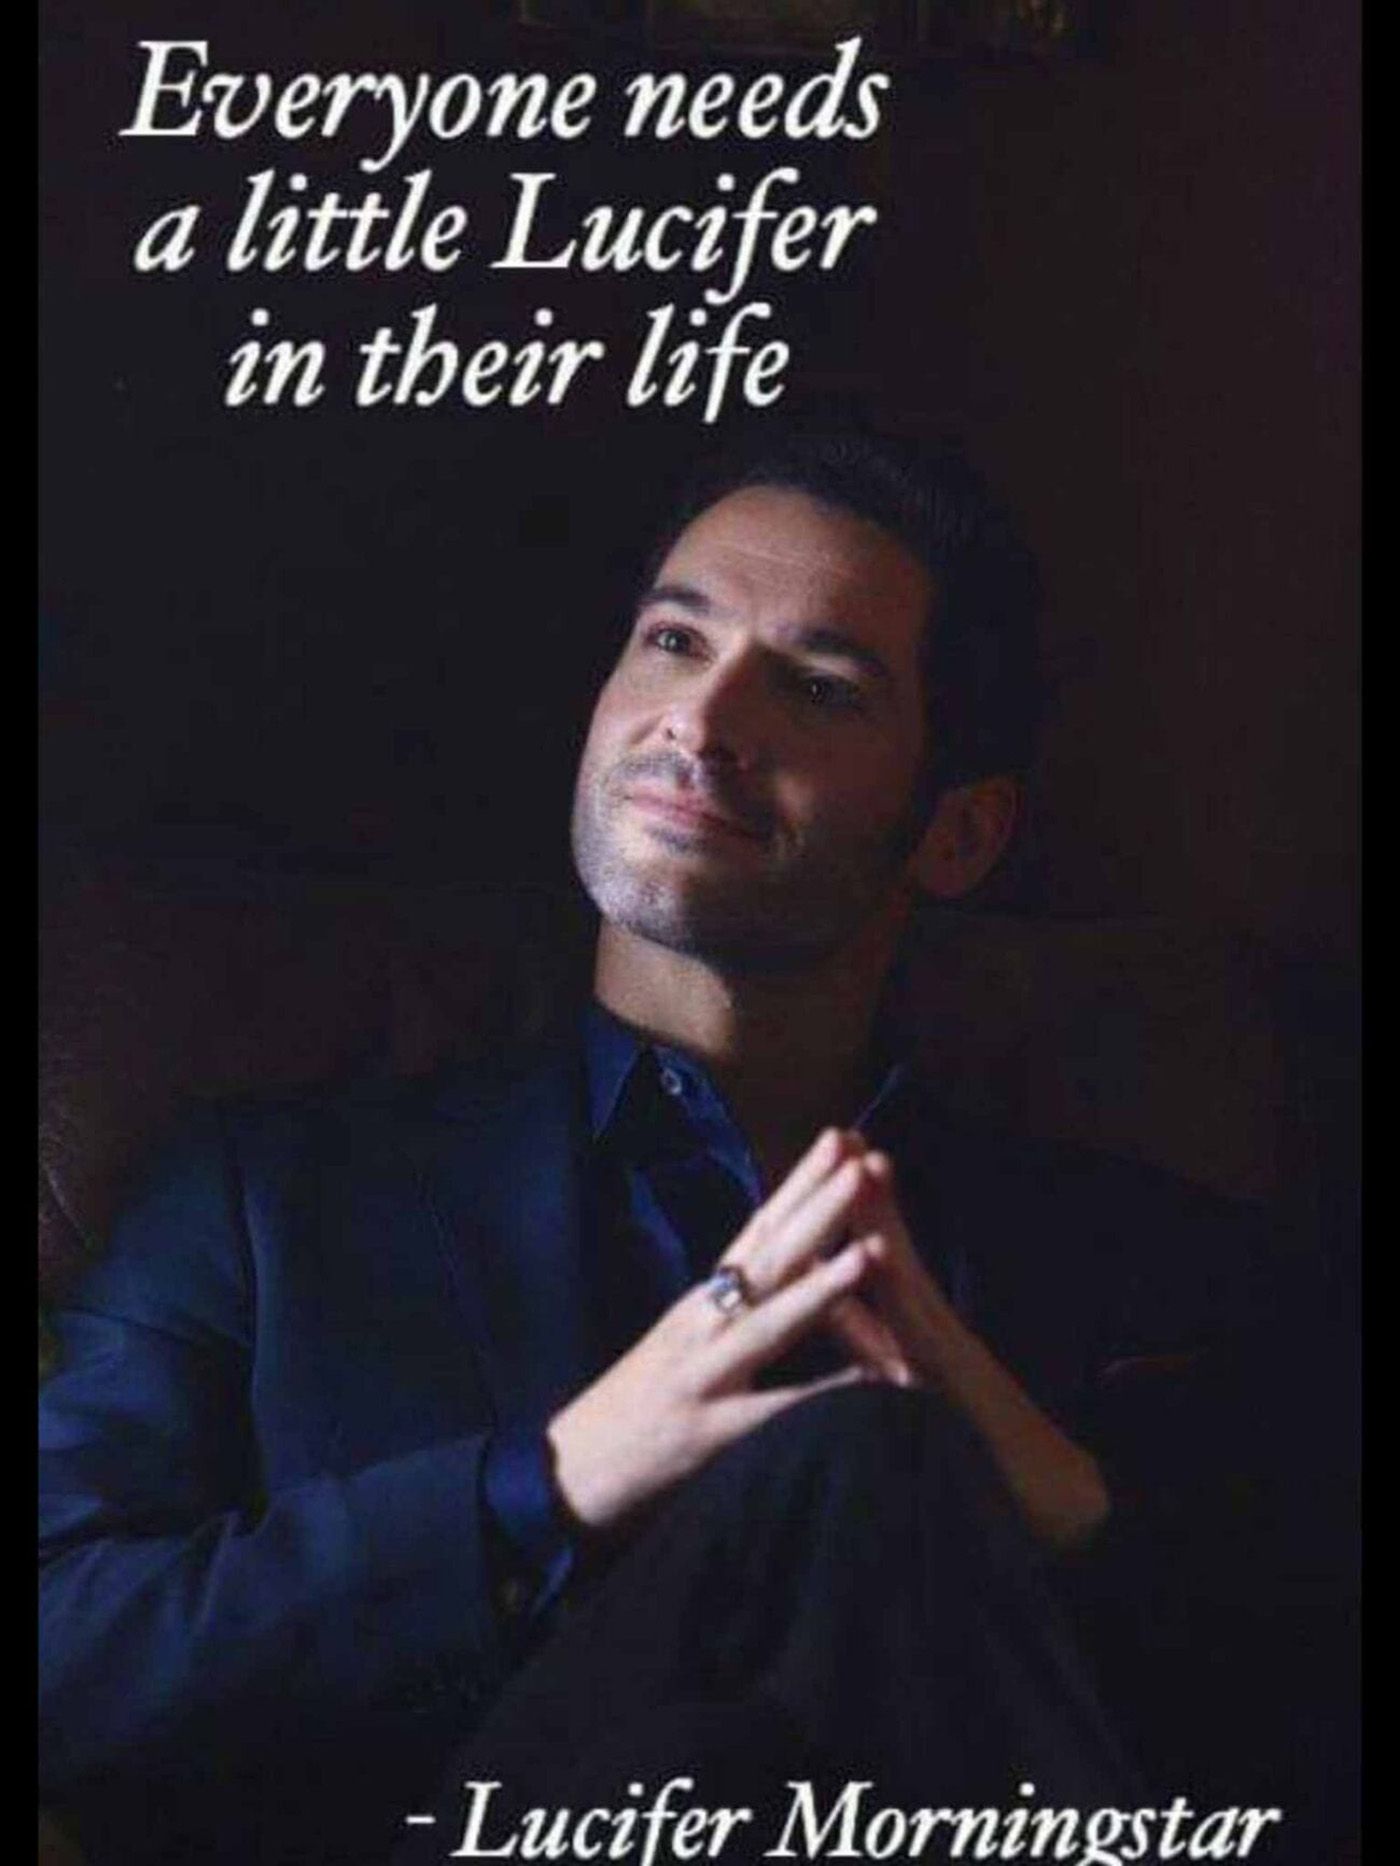 Lucifer with his fingers tented on a black background and a quote in the top, left.